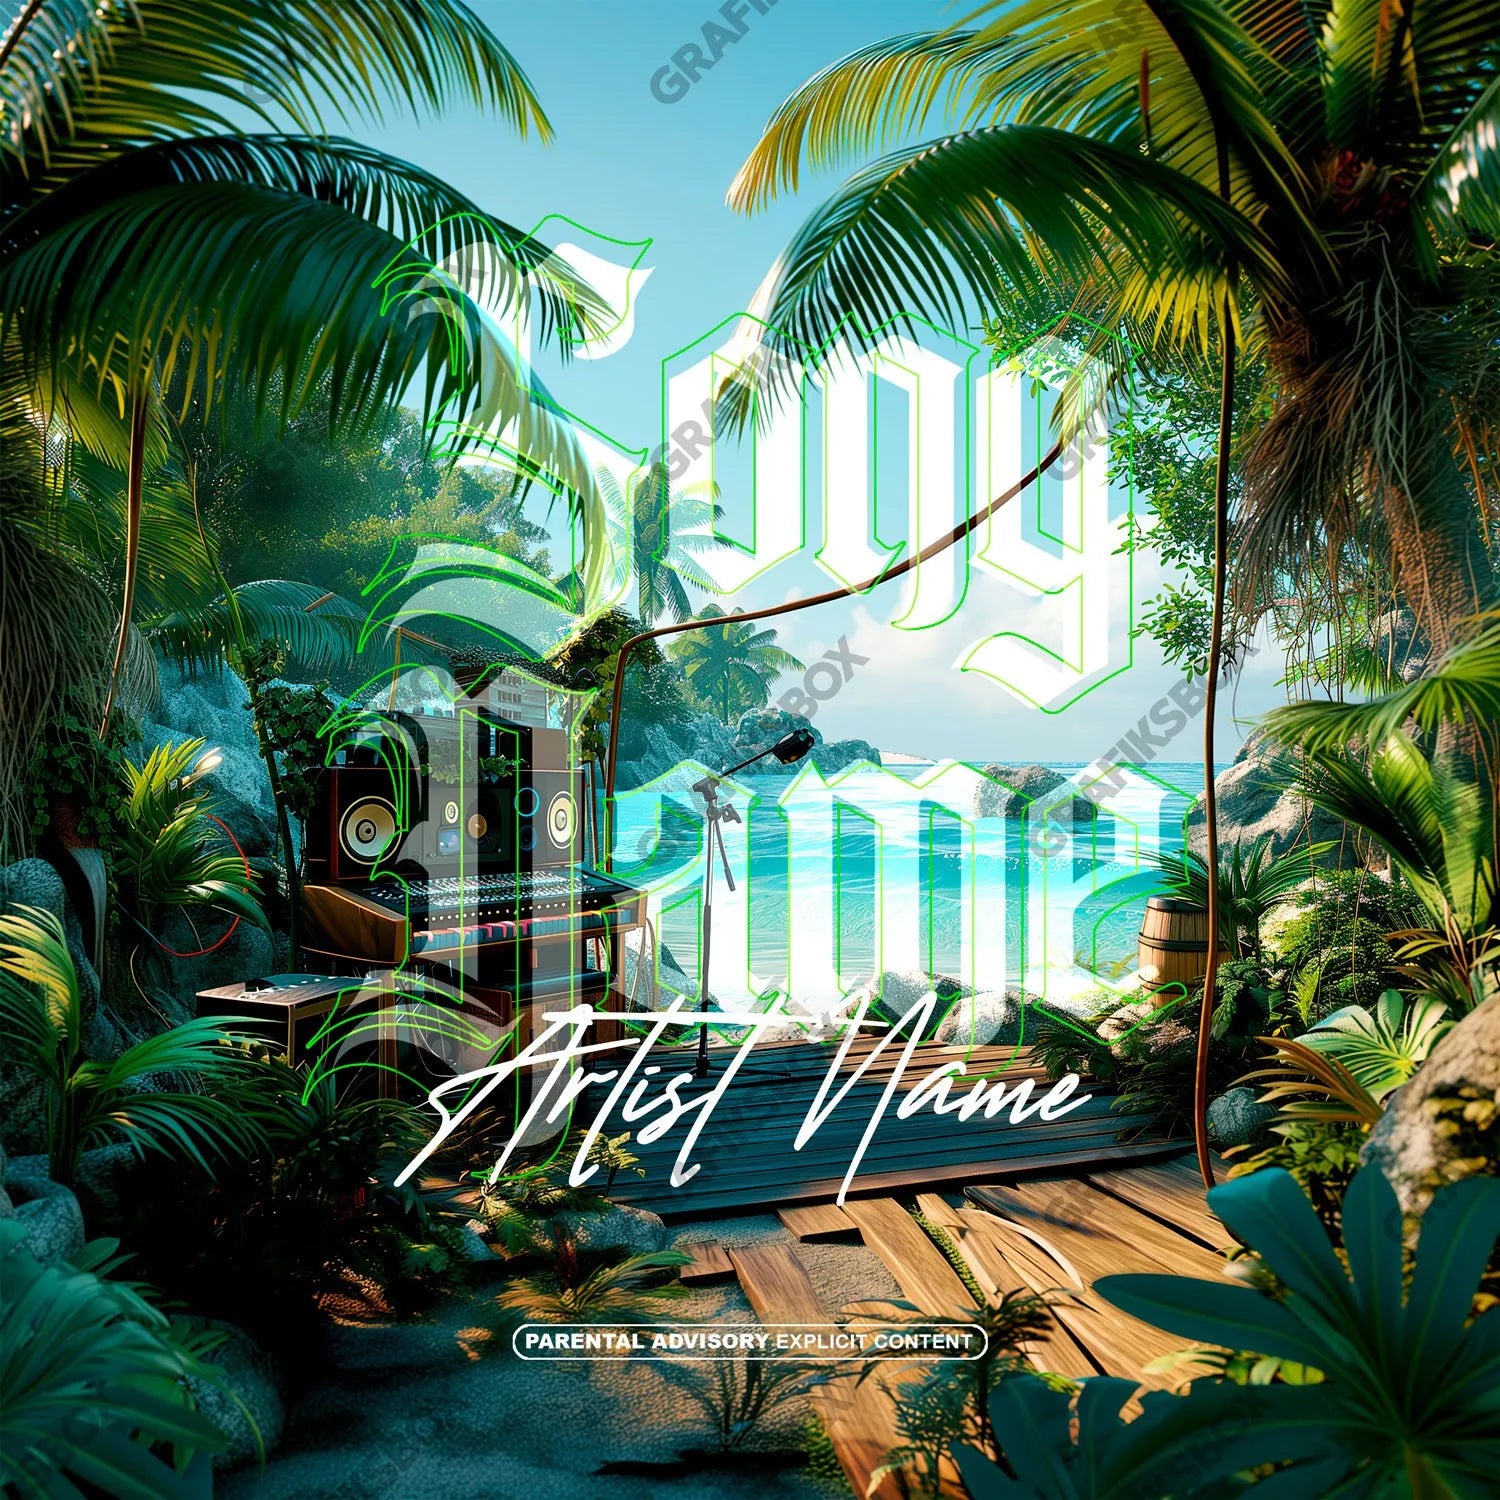 Tropic Song premade cover art